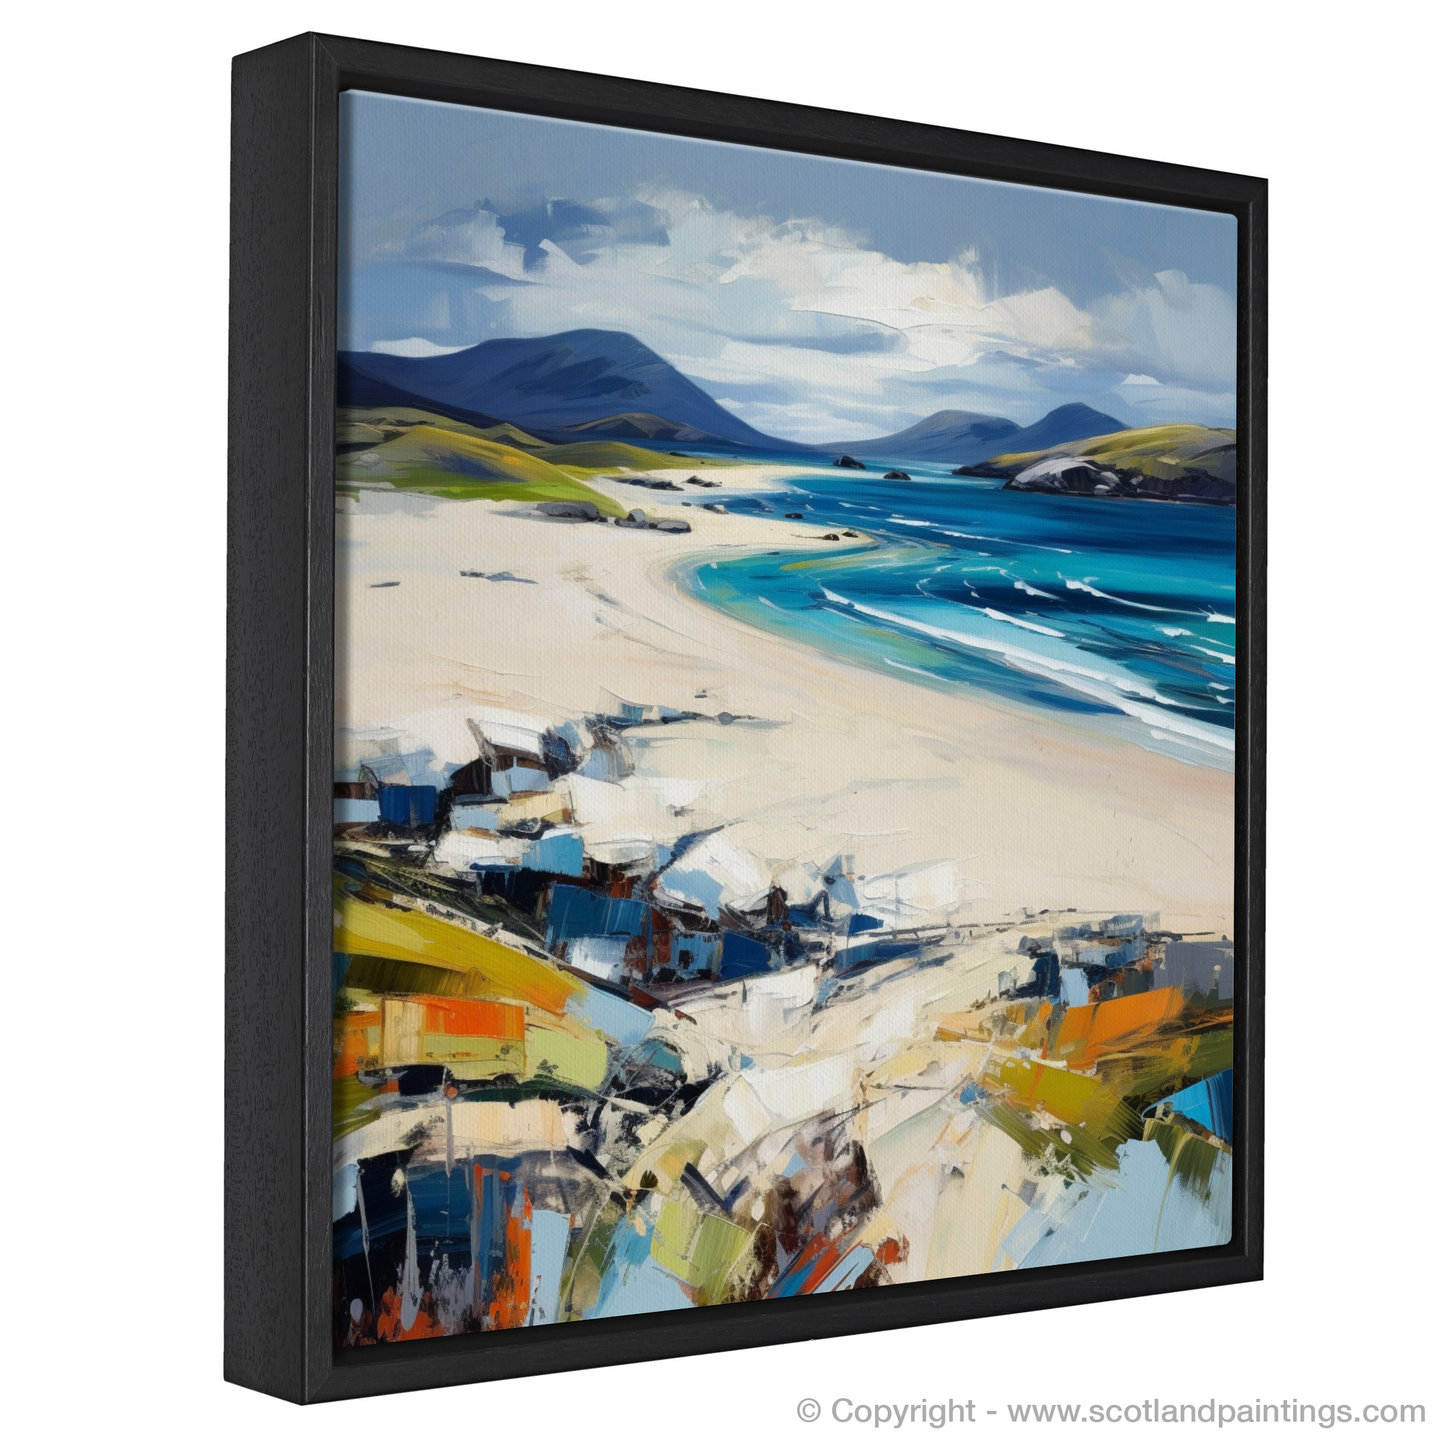 Painting and Art Print of Luskentyre Beach, Isle of Harris entitled "Luskentyre Beach: An Expressionist Ode to Scottish Shores".